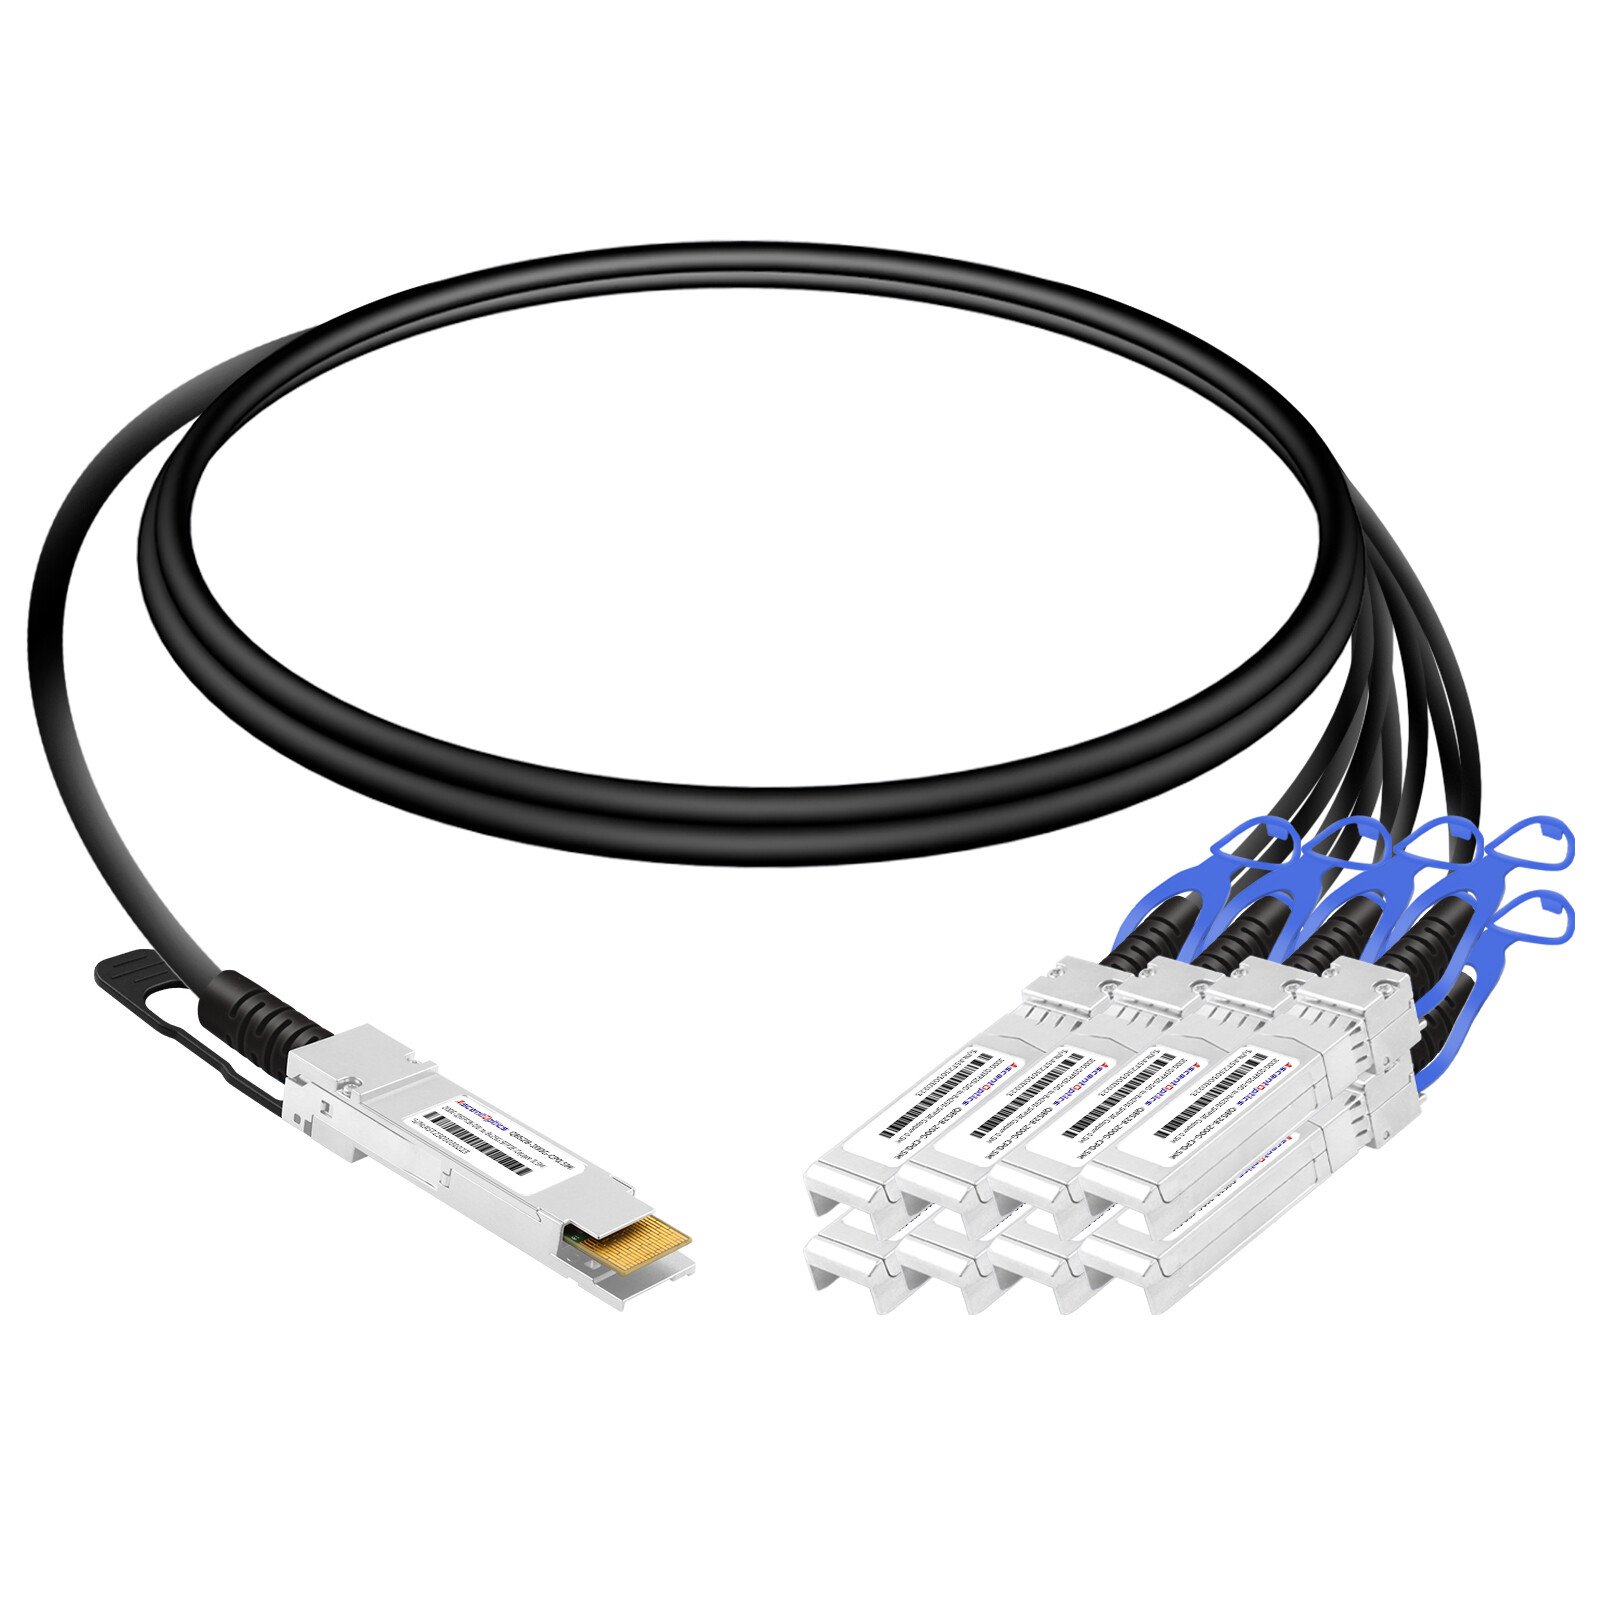 200G QSFP28-DD to 8x 25G SFP28 Copper Breakout Cable,0.5 Meter,Passive